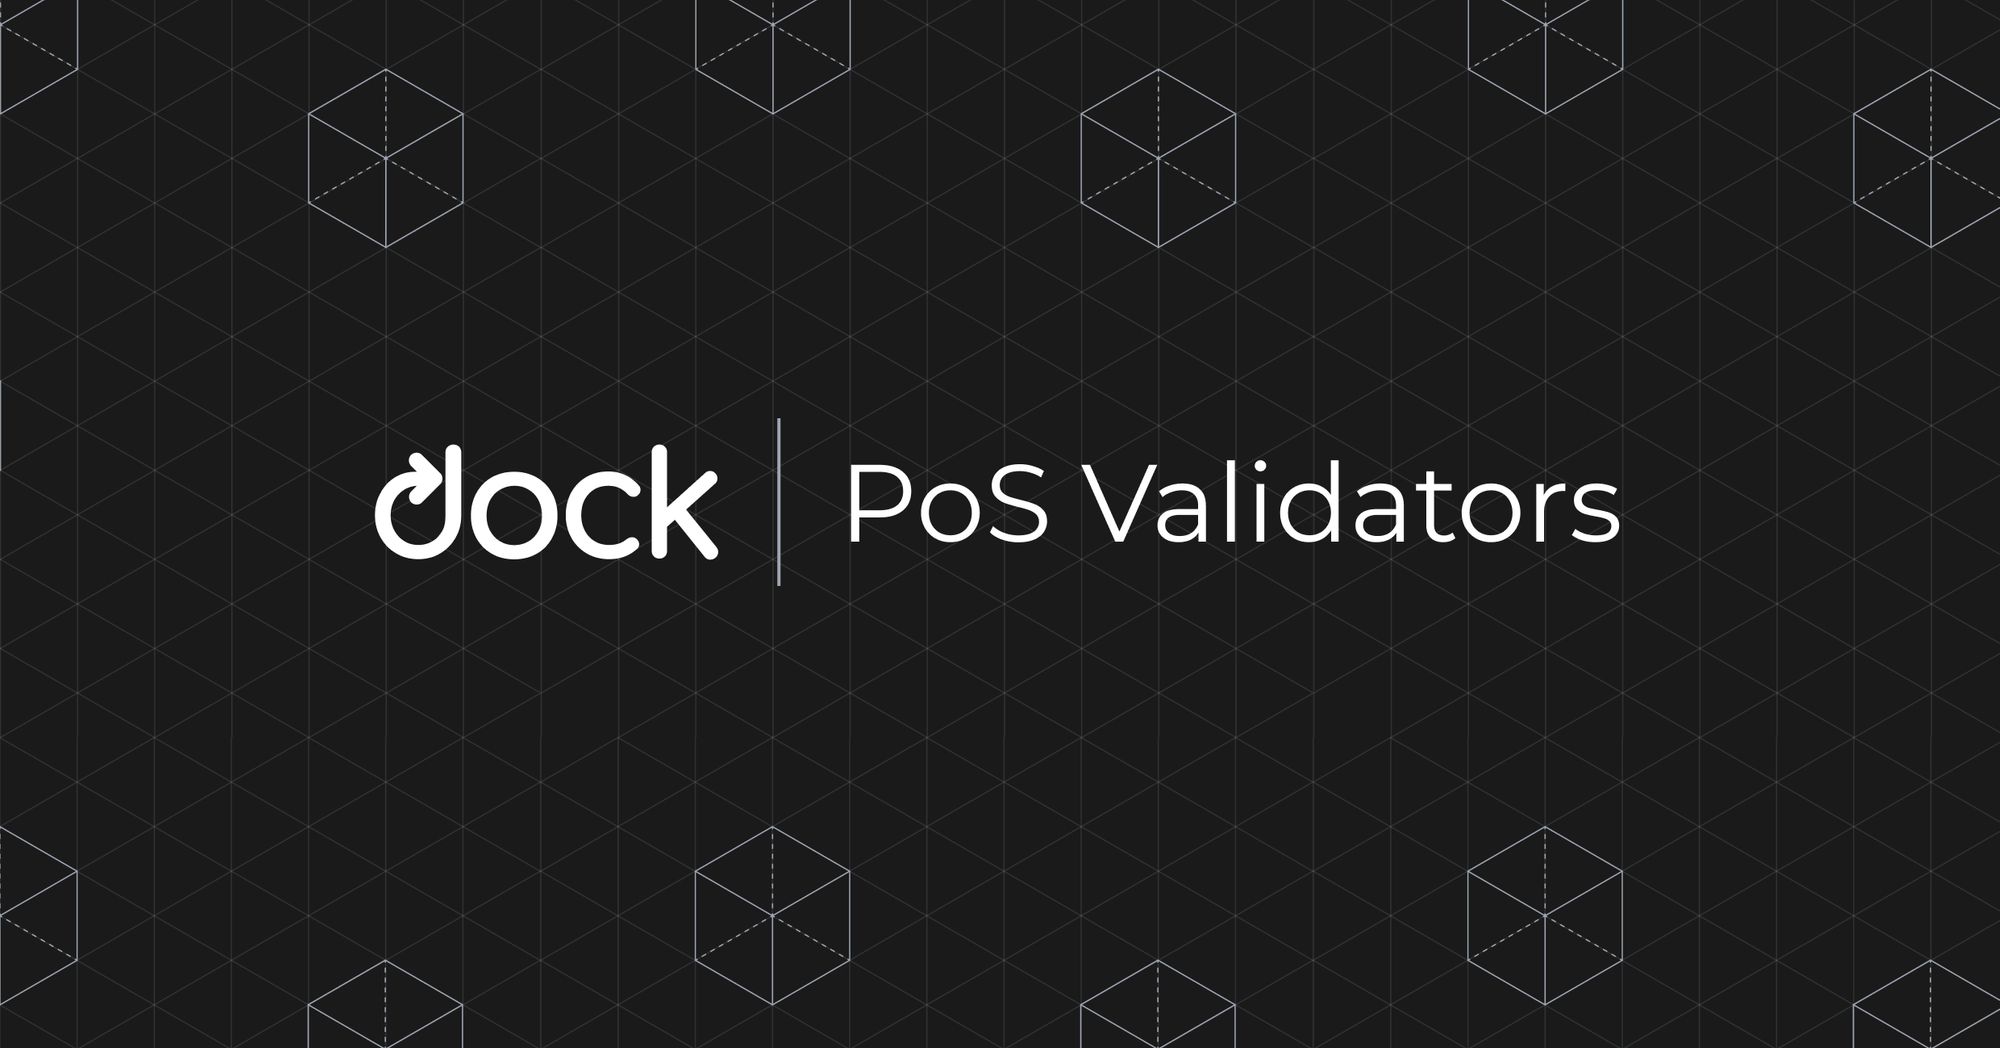 Join Dock Network as a Proof-of-Stake Validator